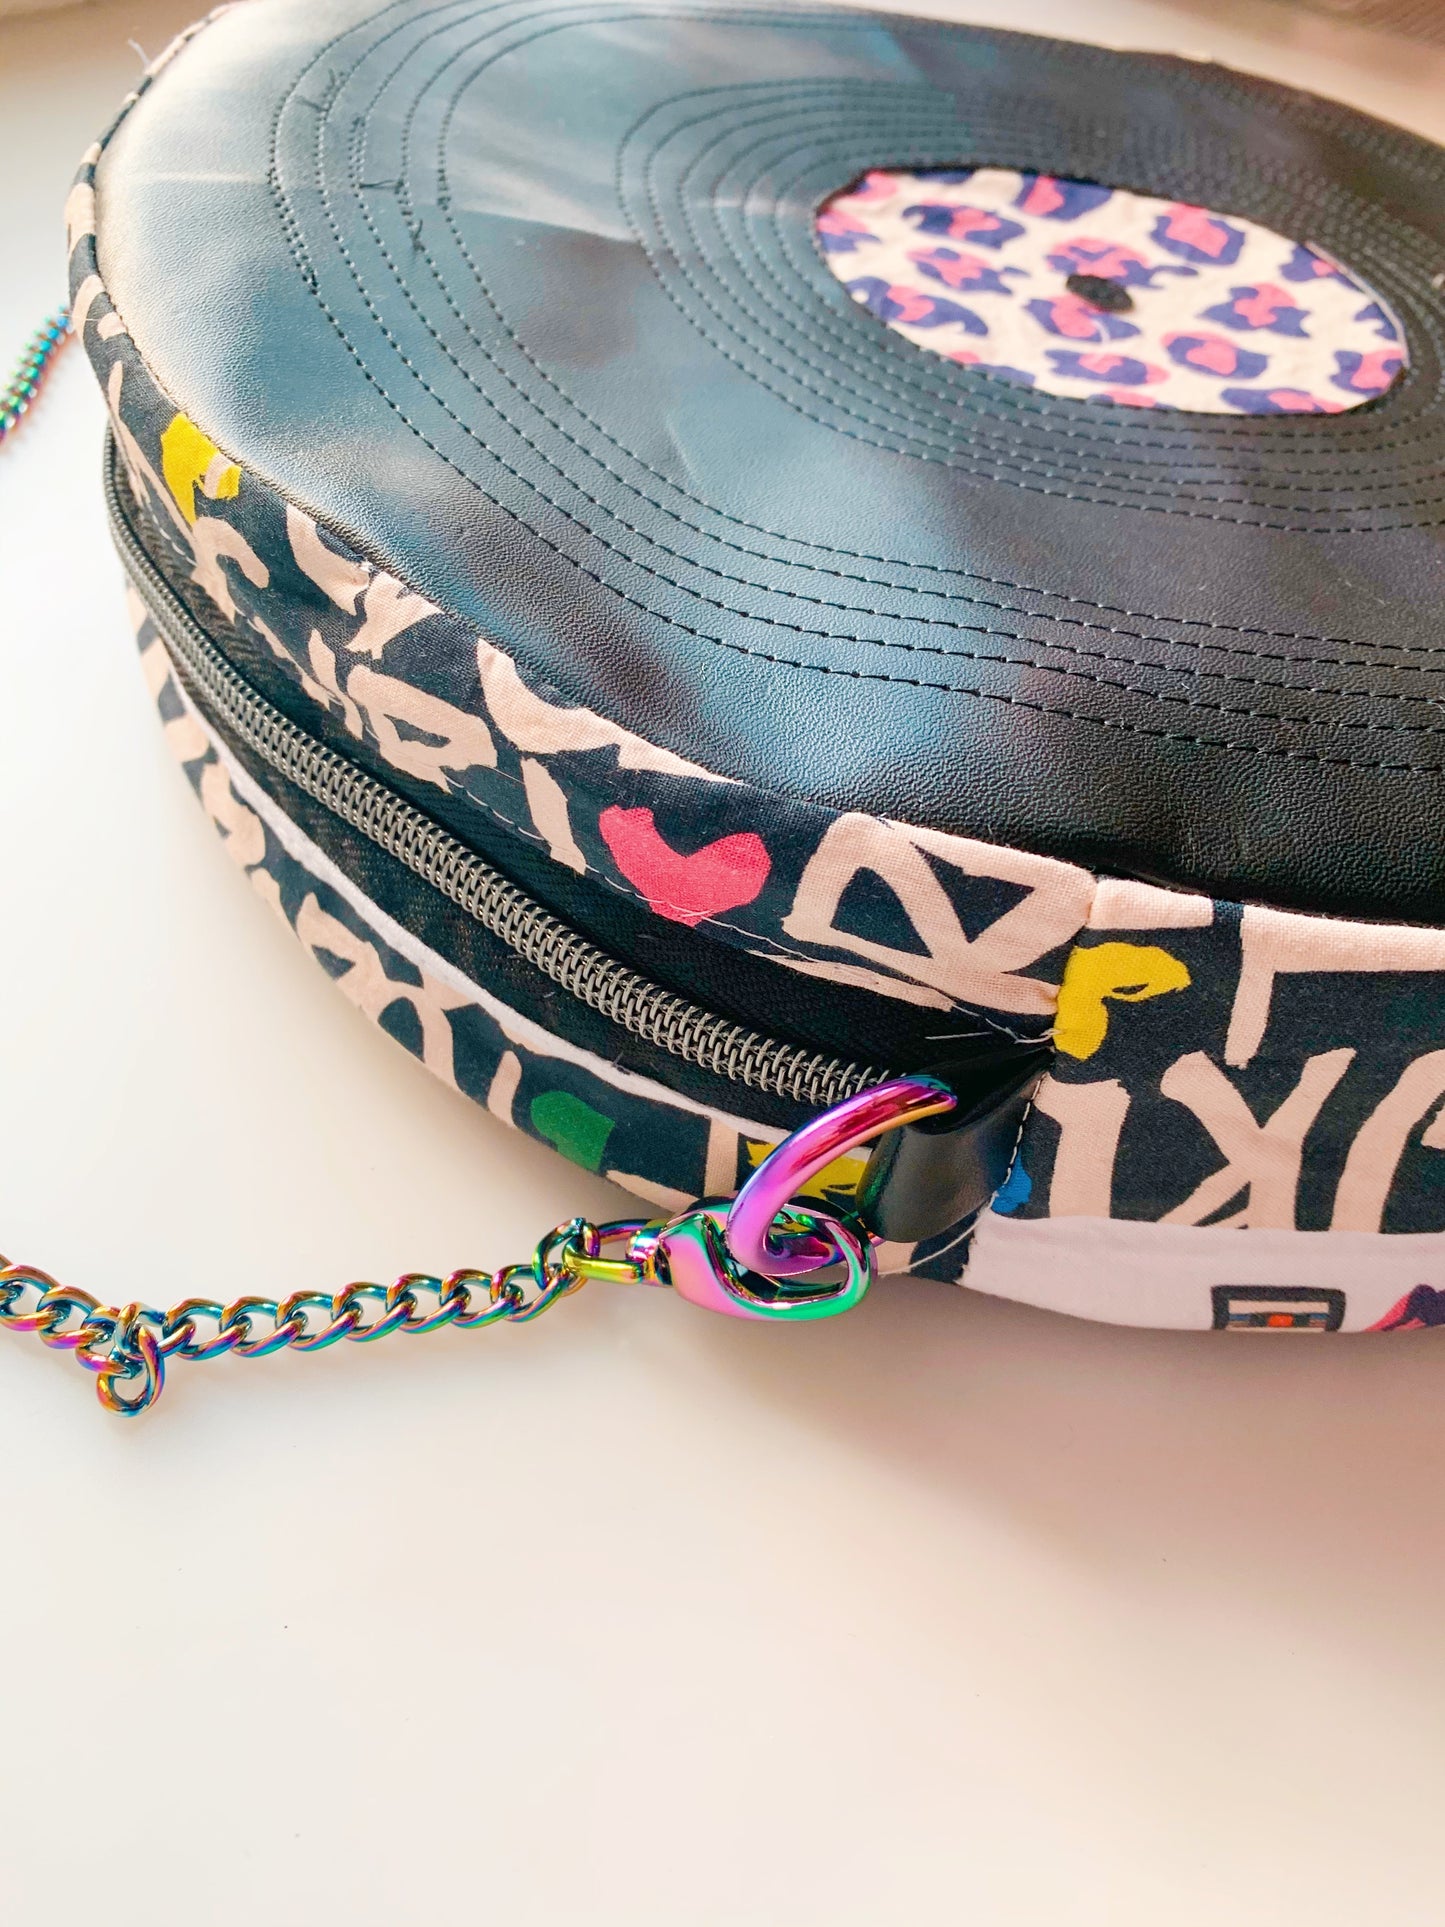 Lp Bag · A Vinyl Record Purse · Sewing on Cut Out + Keep